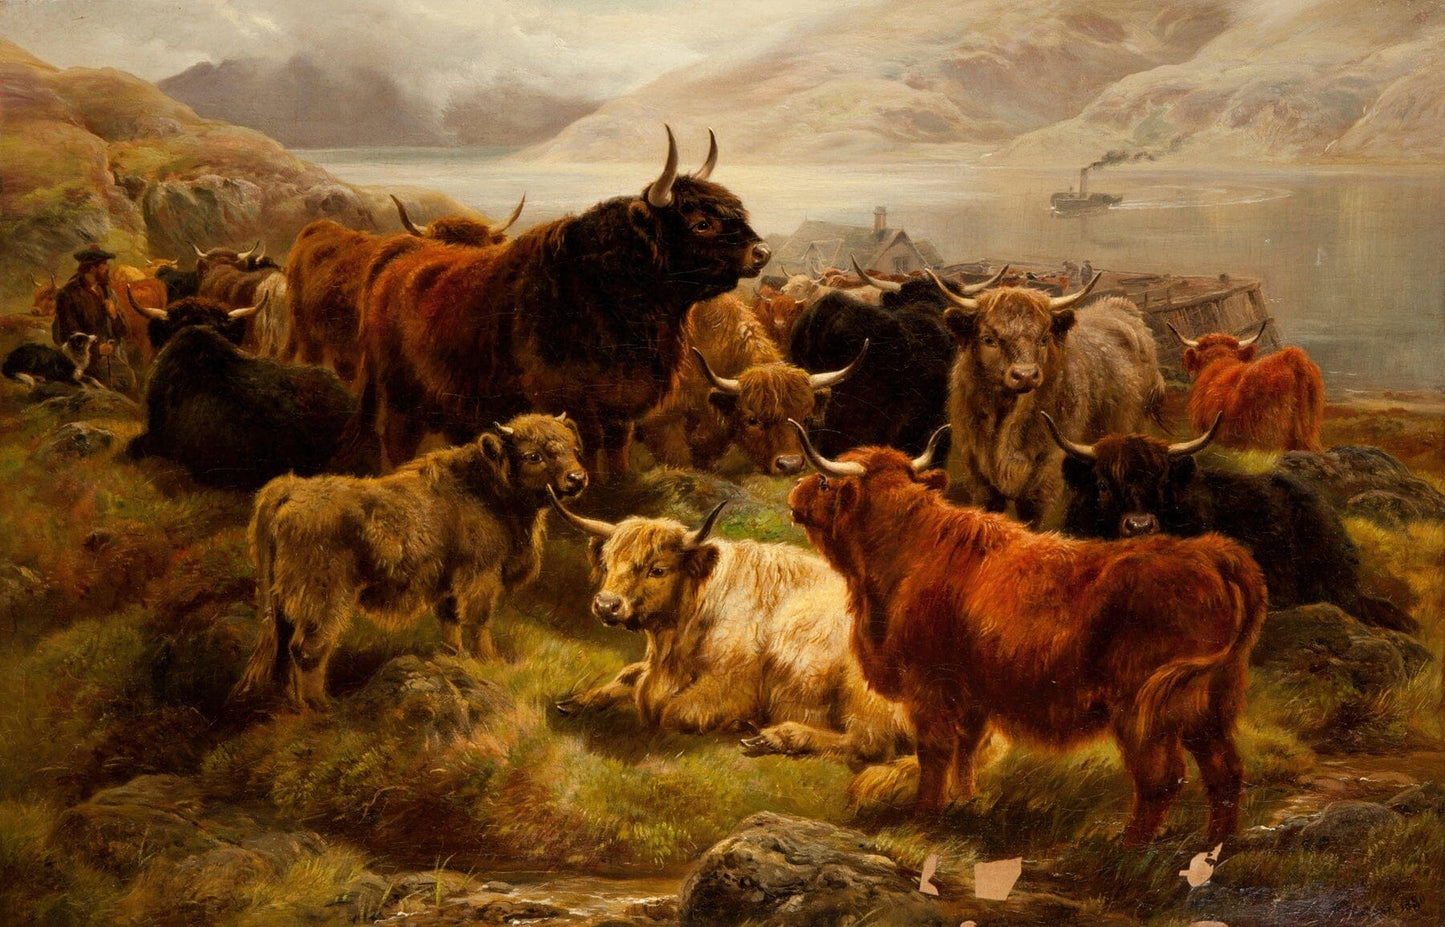 Highland Cattle (1800s) | Vintage cow prints | William Watson Posters, Prints, & Visual Artwork The Trumpet Shop   